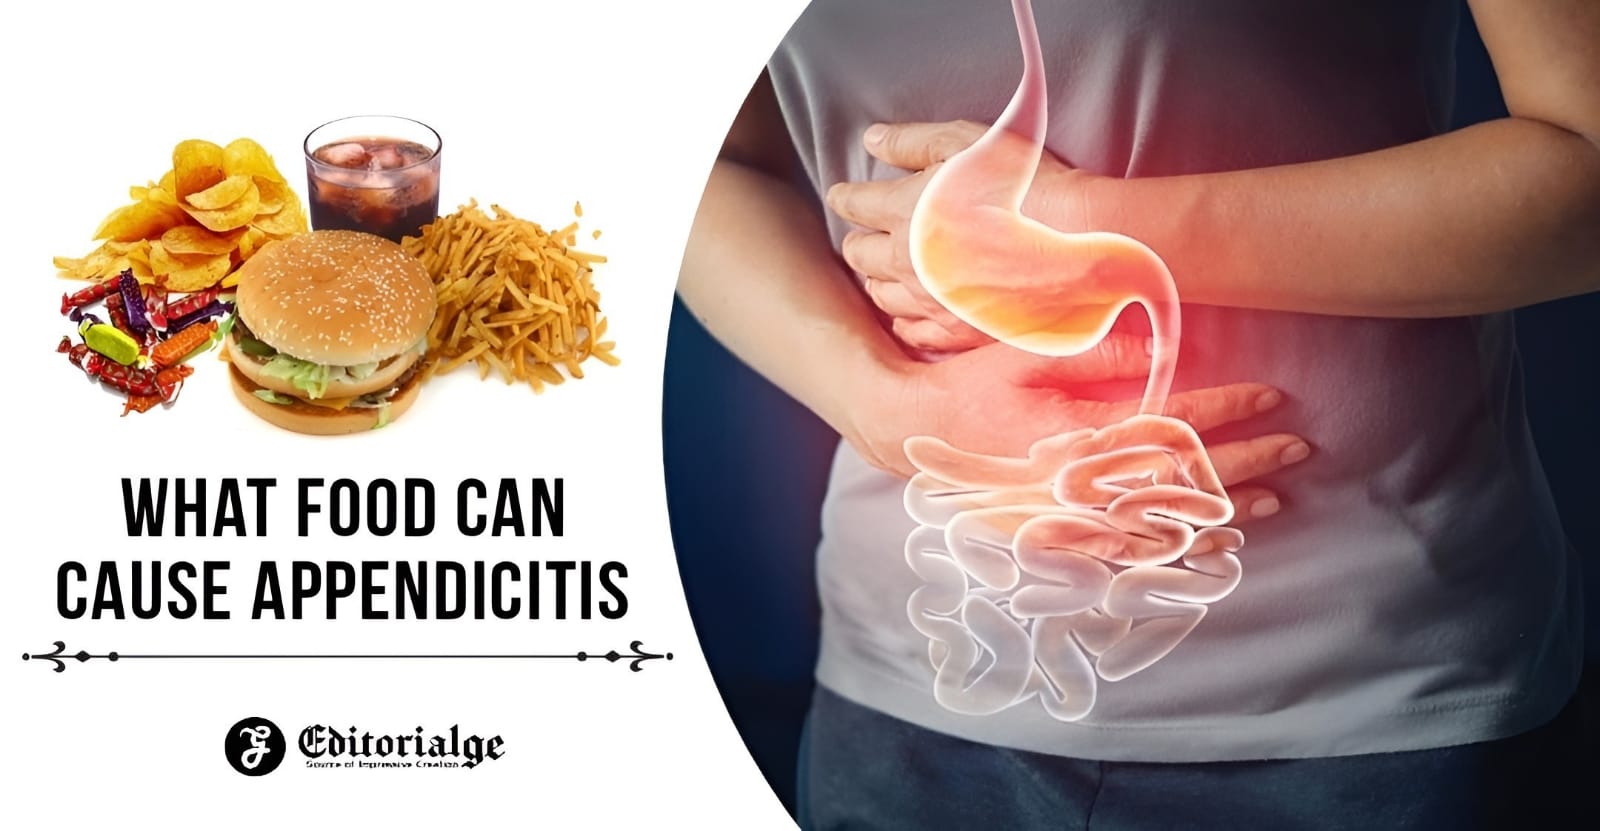 What Food Can Cause Appendicitis